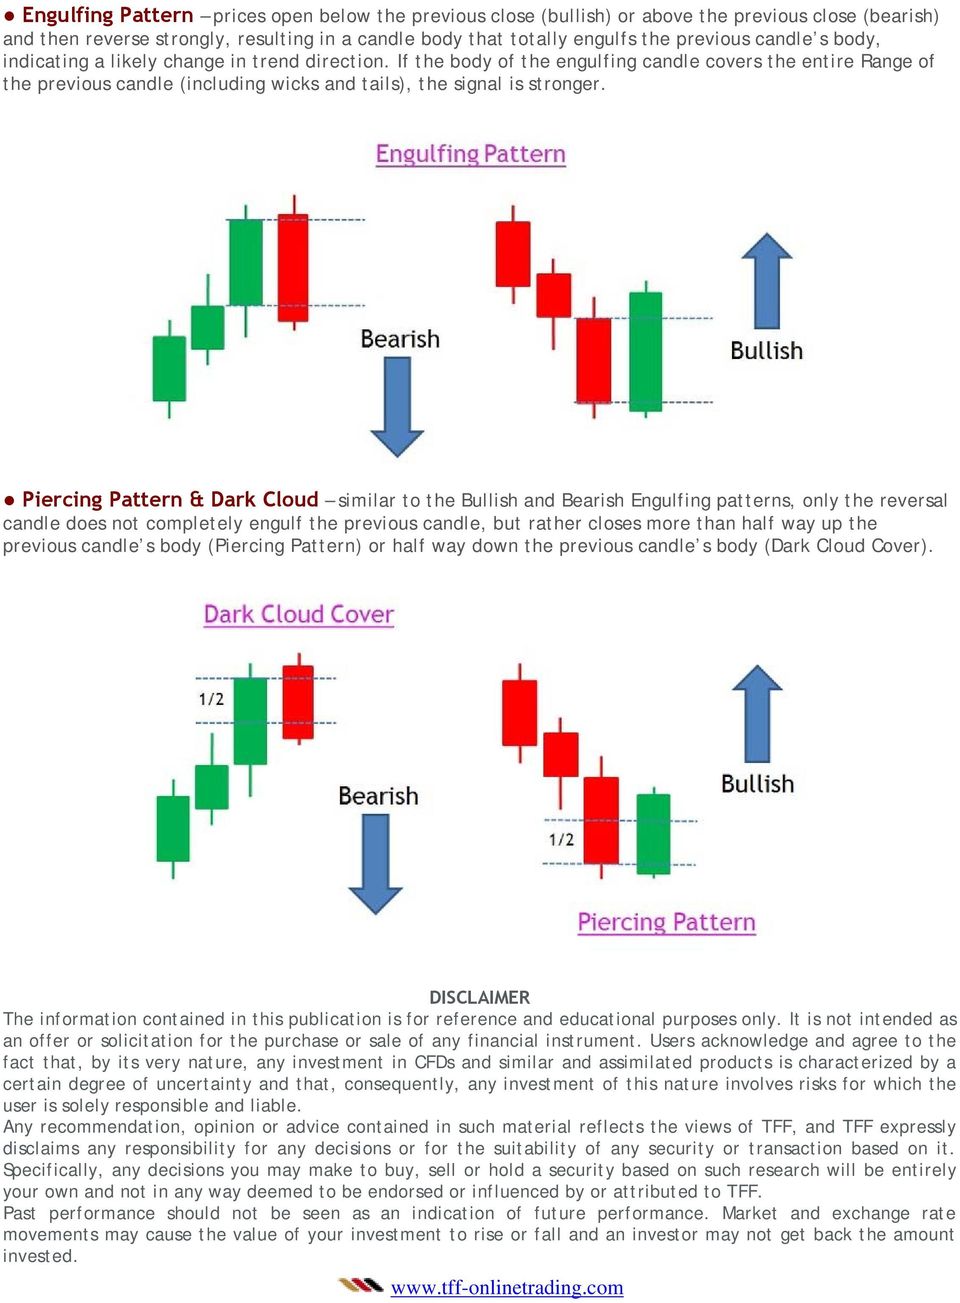 Piercing Pattern & Dark Cloud similar to the Bullish and Bearish Engulfing patterns, only the reversal candle does not completely engulf the previous candle, but rather closes more than half way up